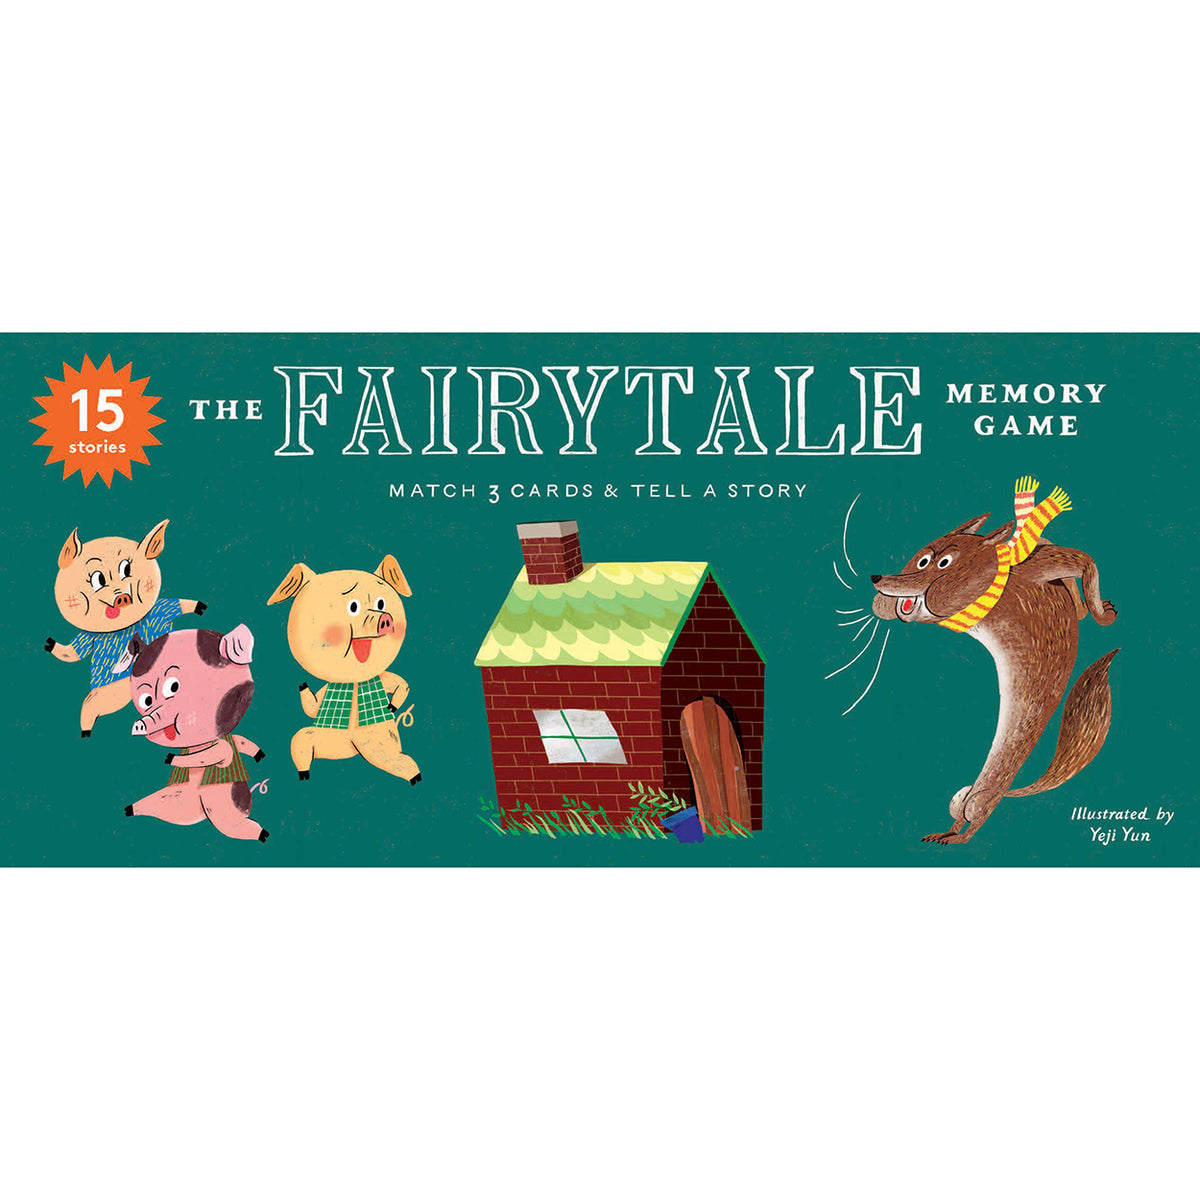 Image of The Fairytale Memory Game box